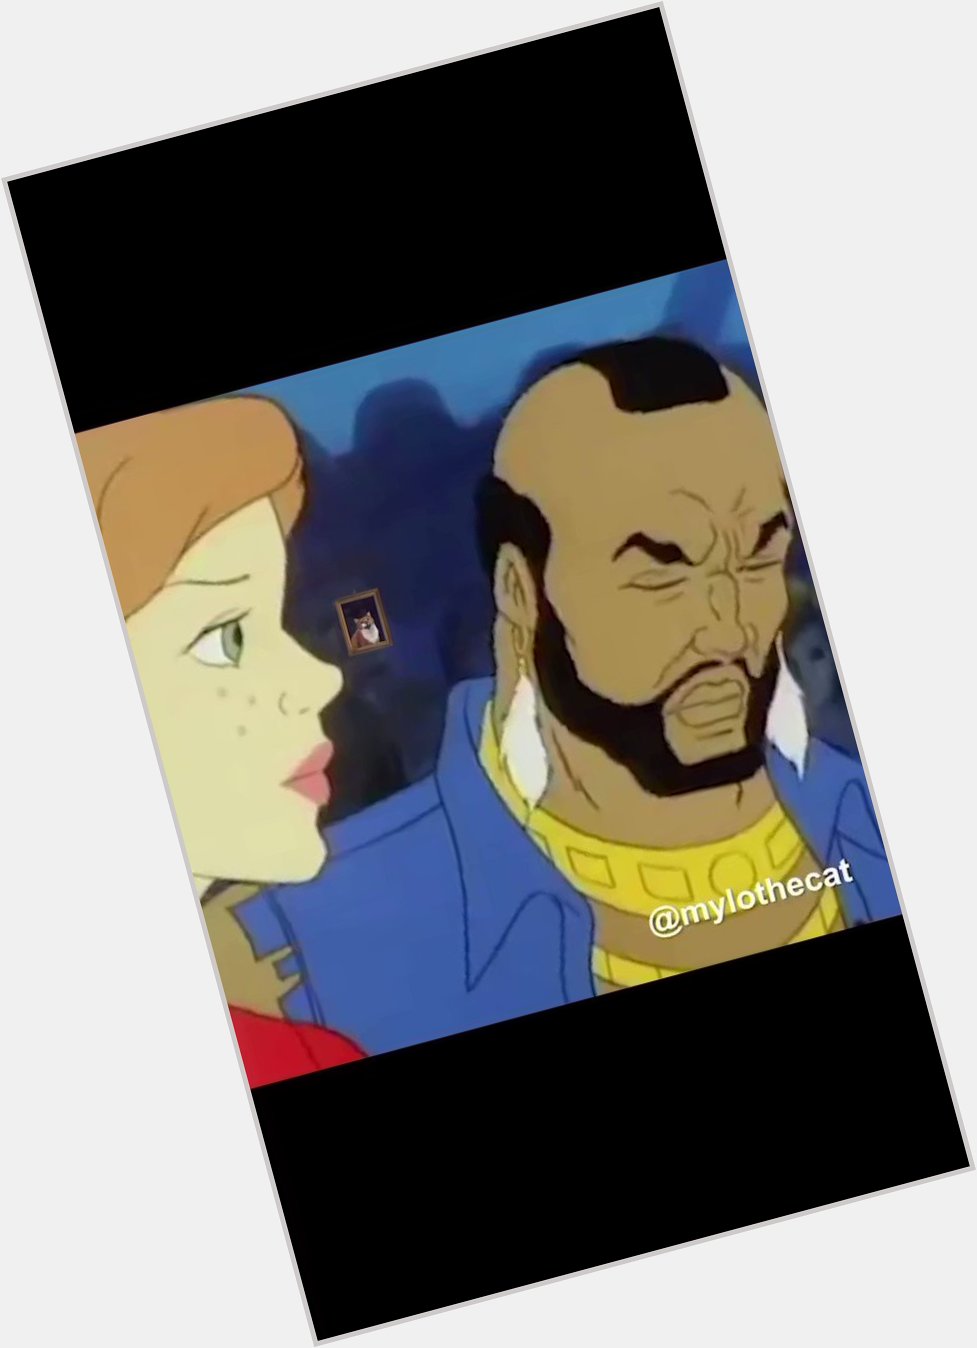 Mr. T as Sean Price rapping the classic, Onion Head . Happy Birthday and RIP P, one of the all-time greats. 